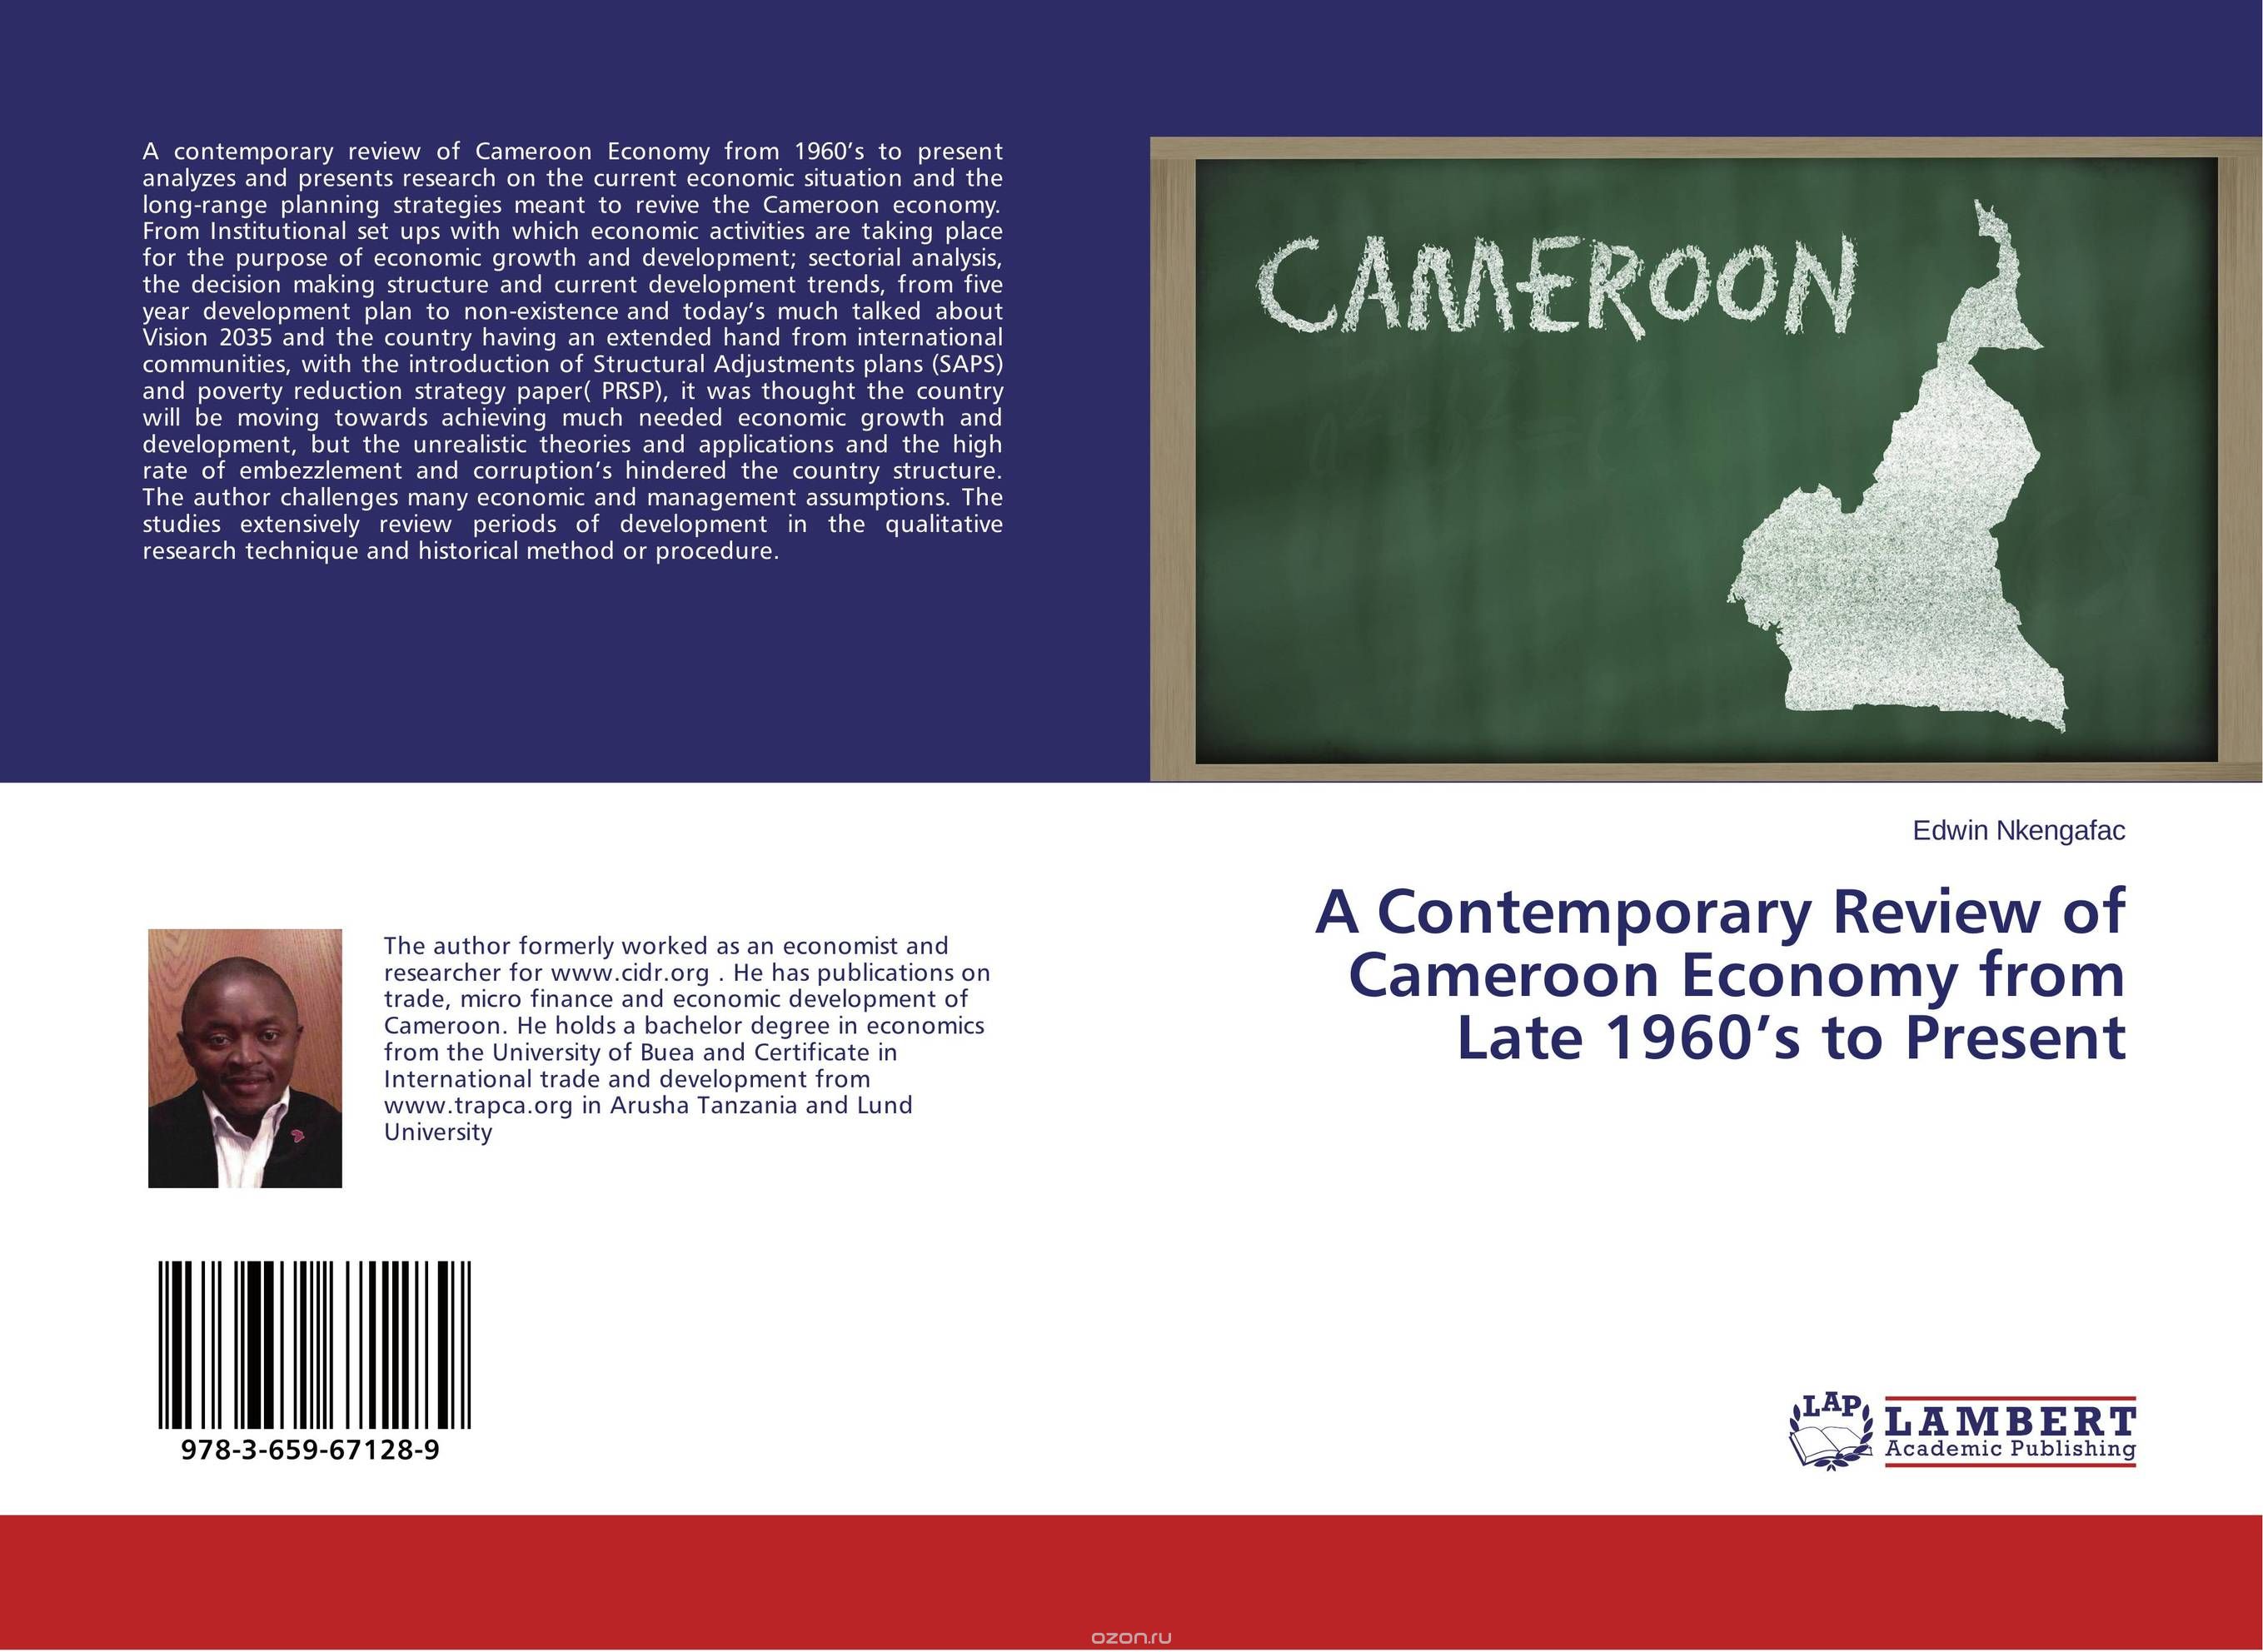 A Contemporary Review of Cameroon Economy from Late 1960’s to Present